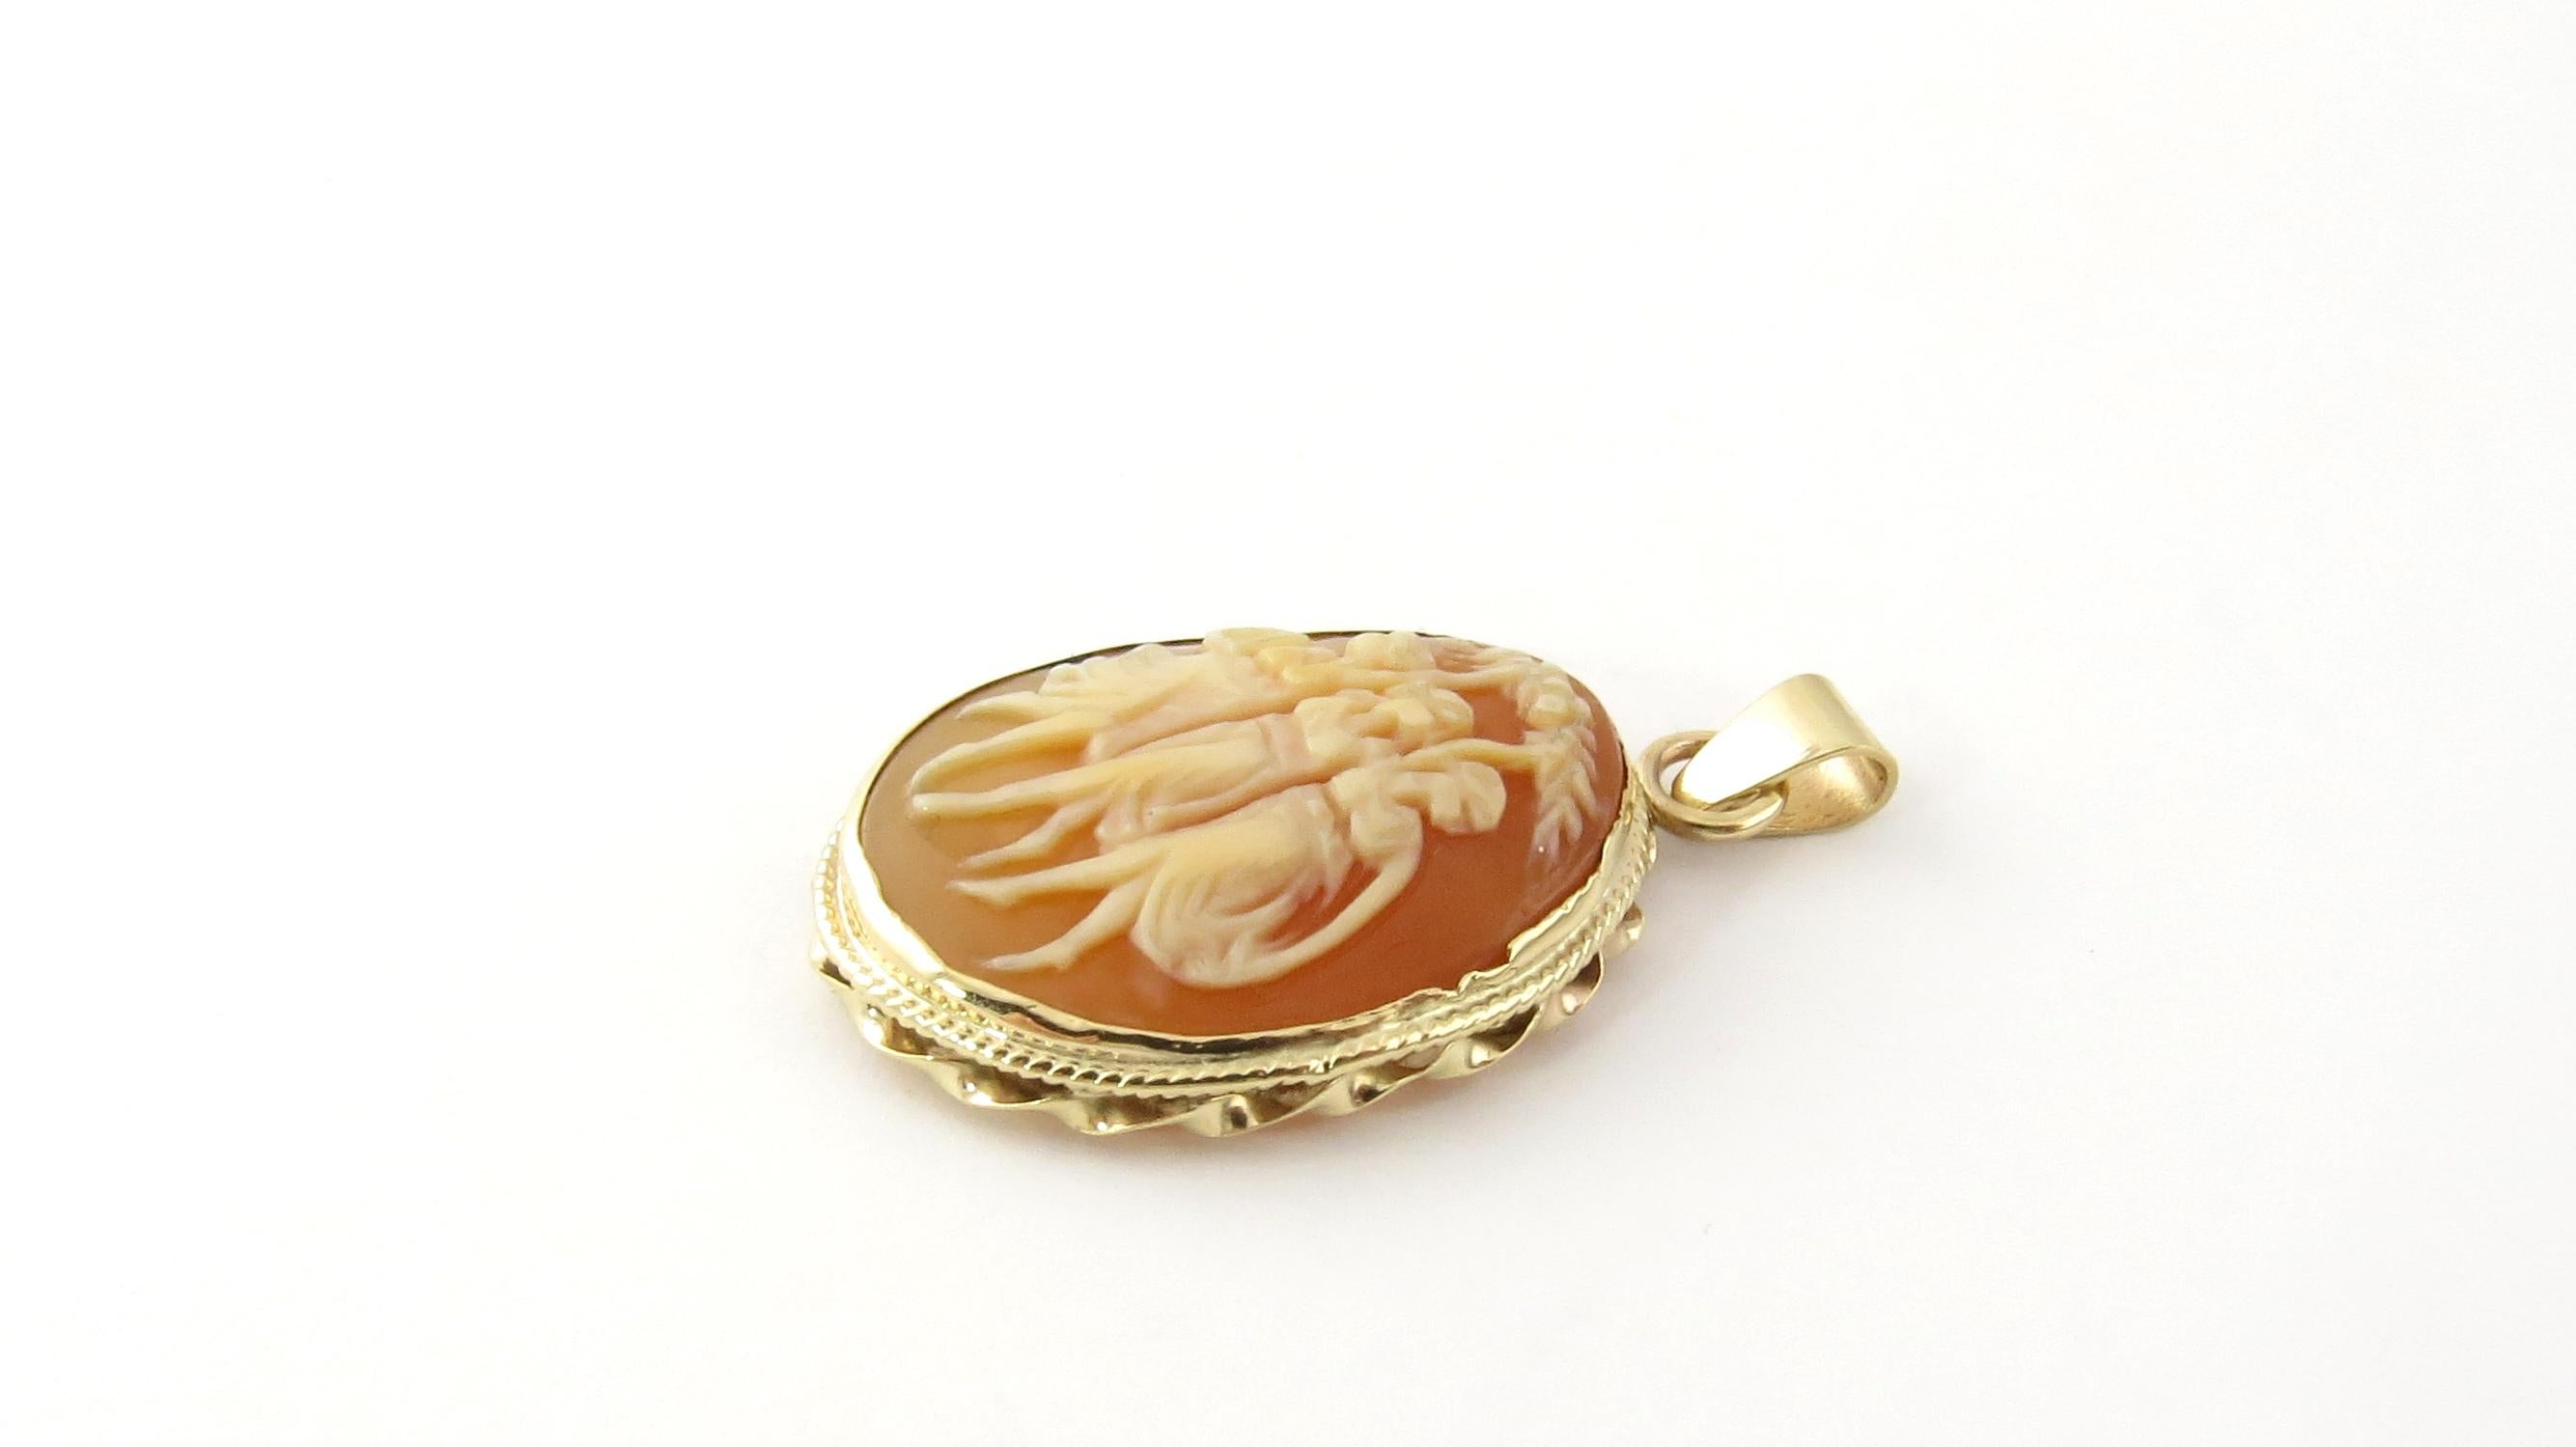 Vintage 14 Karat Yellow Gold Cameo Pendant

This lovely pendant features three lovely ladies holding their parasols framed in beautifully detailed 14K yellow gold.

Size: 28 mm x 22 mm

Weight: 3.2 dwt. / 5.0 gr.

Stamped: 14K

Very good condition,